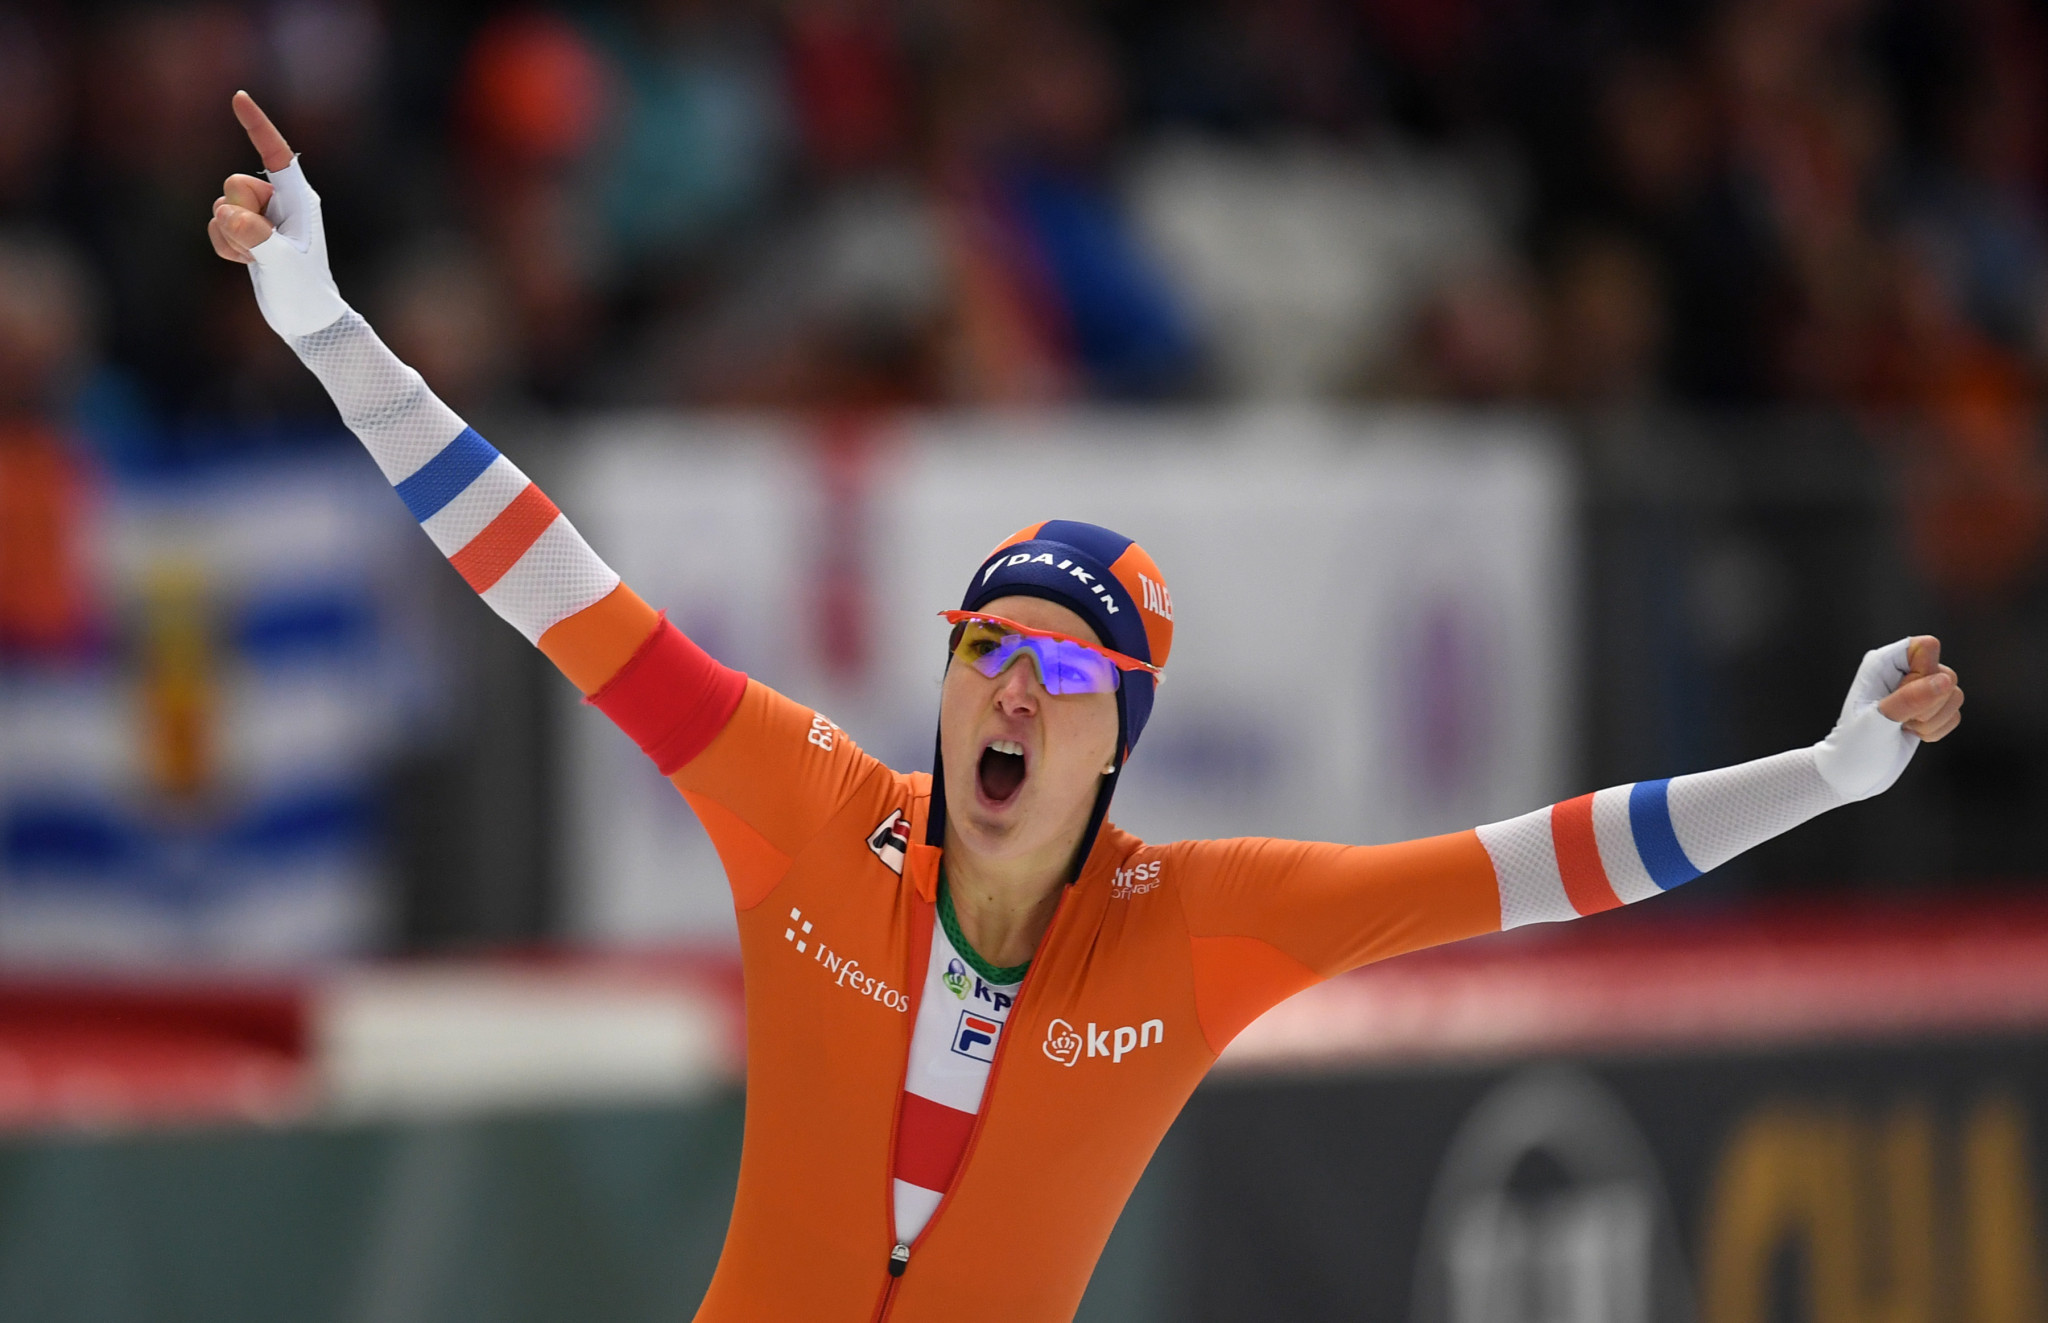 Dutch star Ireen Wüst secured her fourth 1,500 metres title at the ISU World Single Distances Speed Skating Championships in Inzell©Getty Images